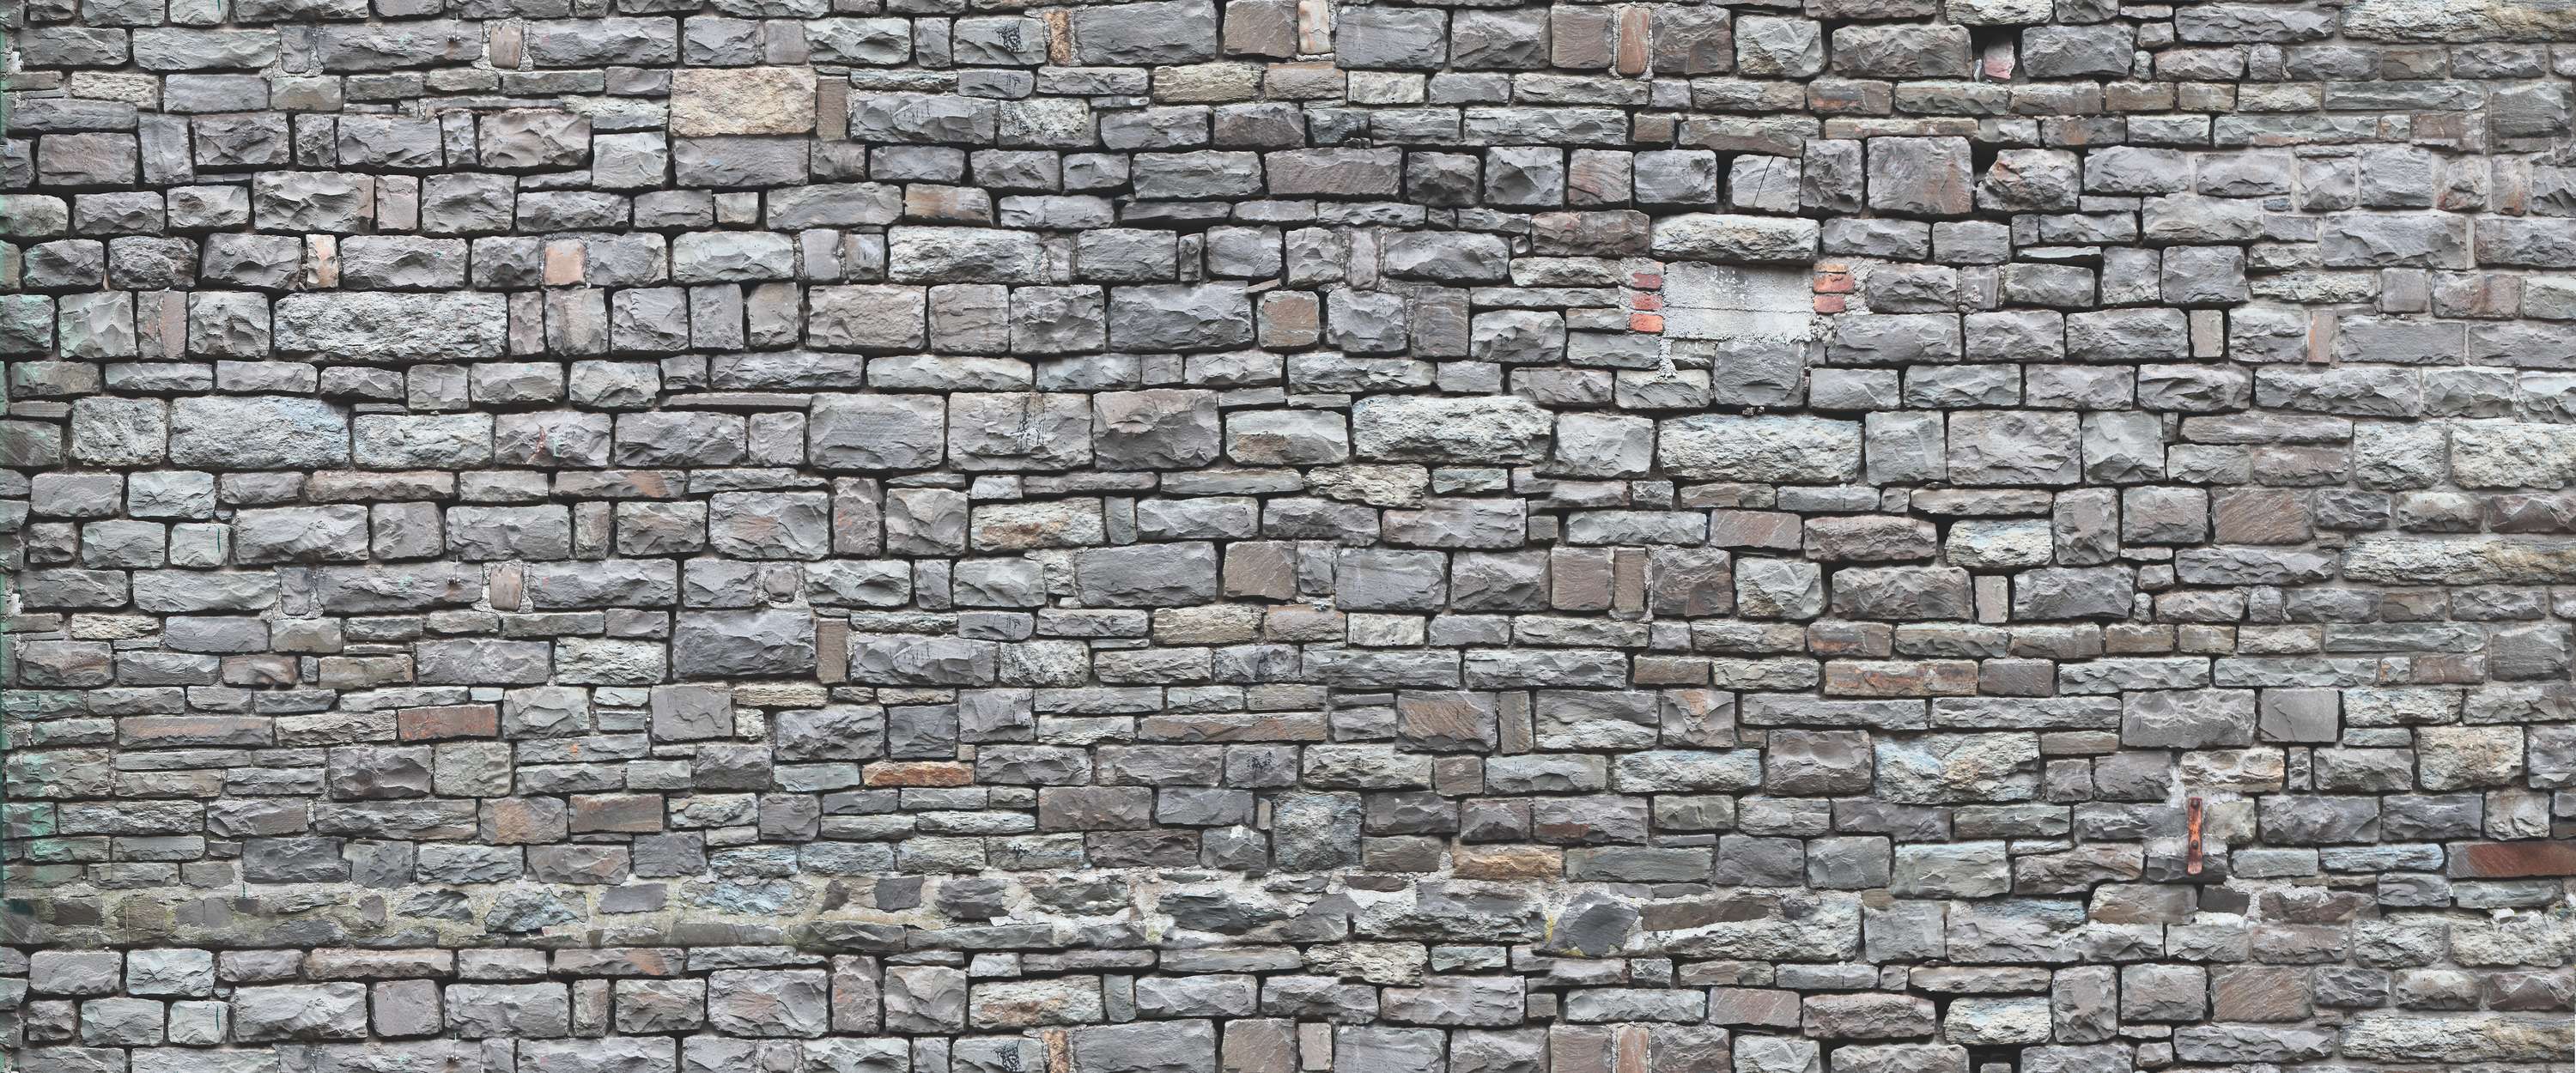             Photo wallpaper with rustic stones - grey
        